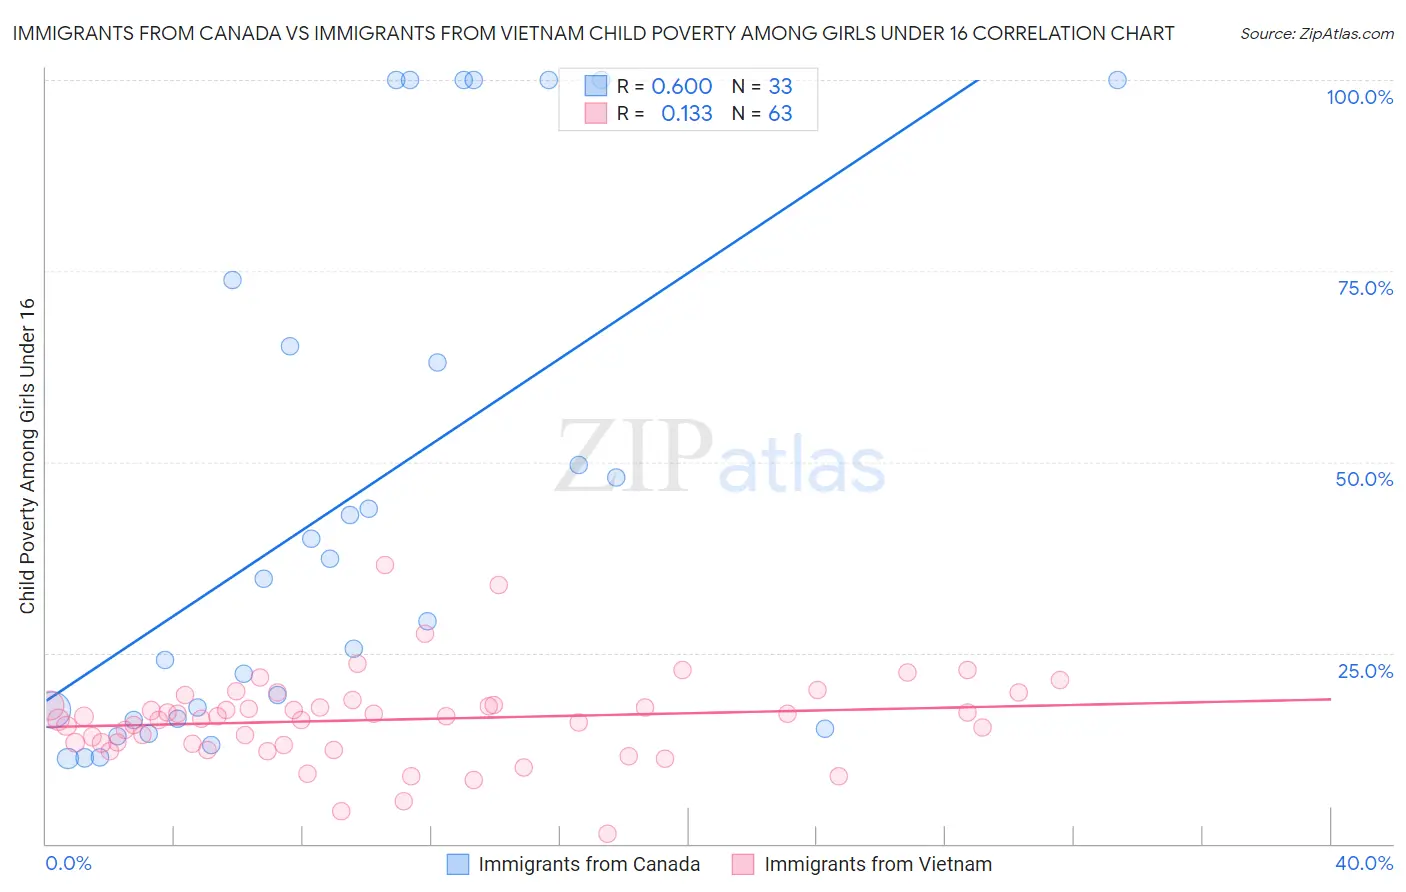 Immigrants from Canada vs Immigrants from Vietnam Child Poverty Among Girls Under 16